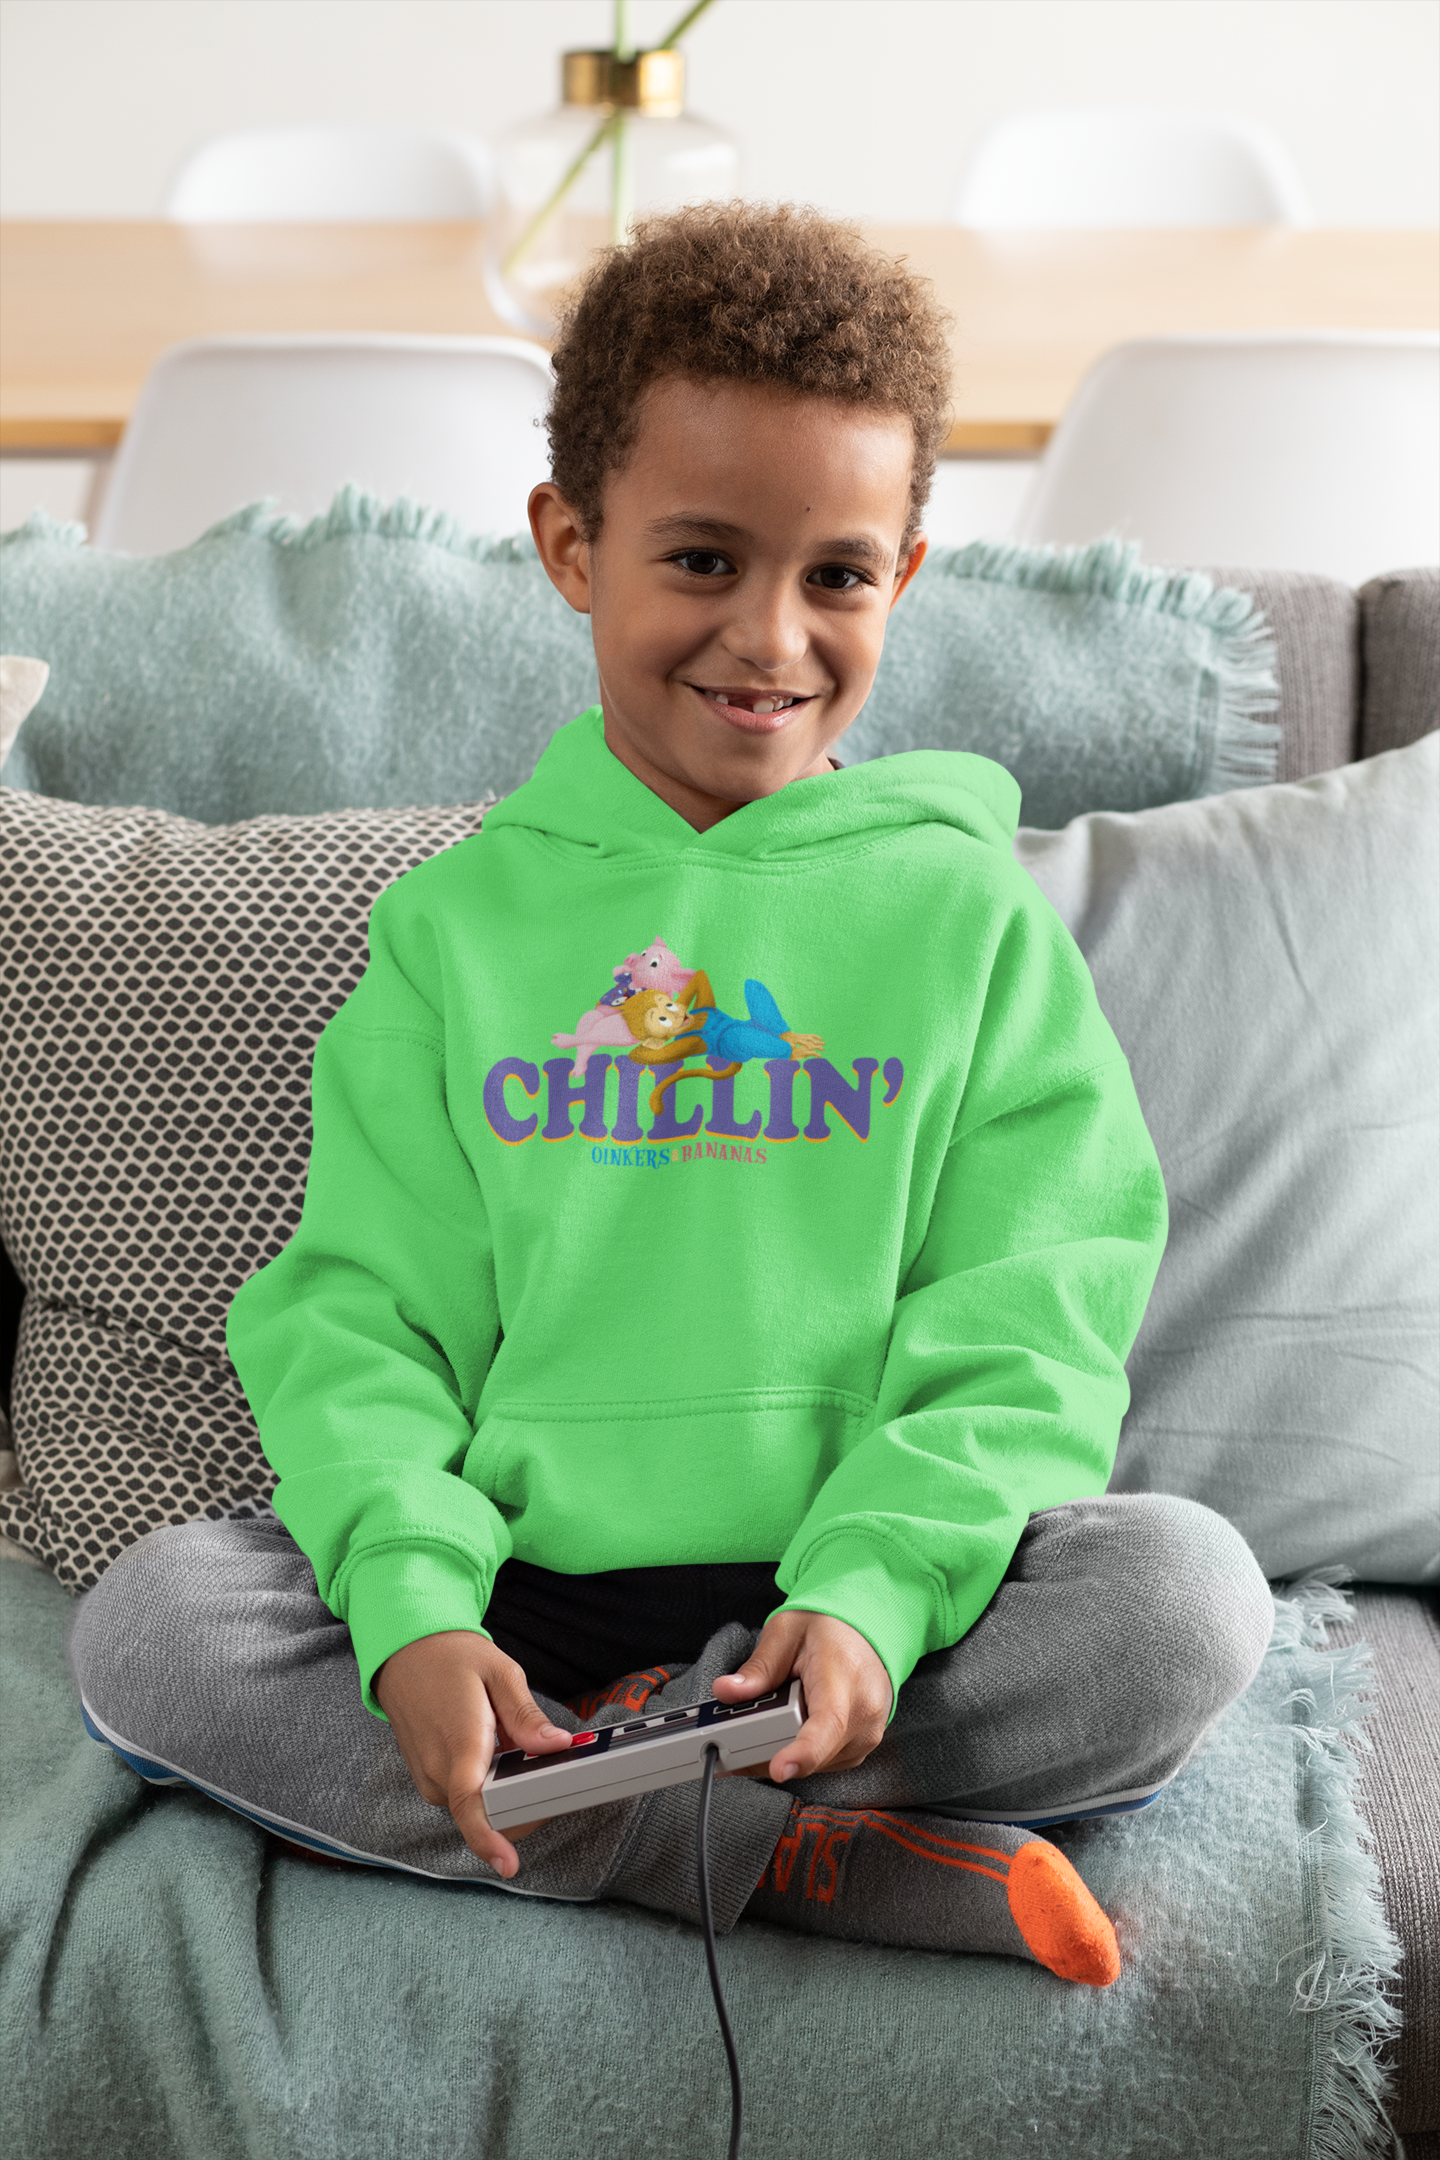 "Chillin" Oinkers and Bananas Kids Hoodie